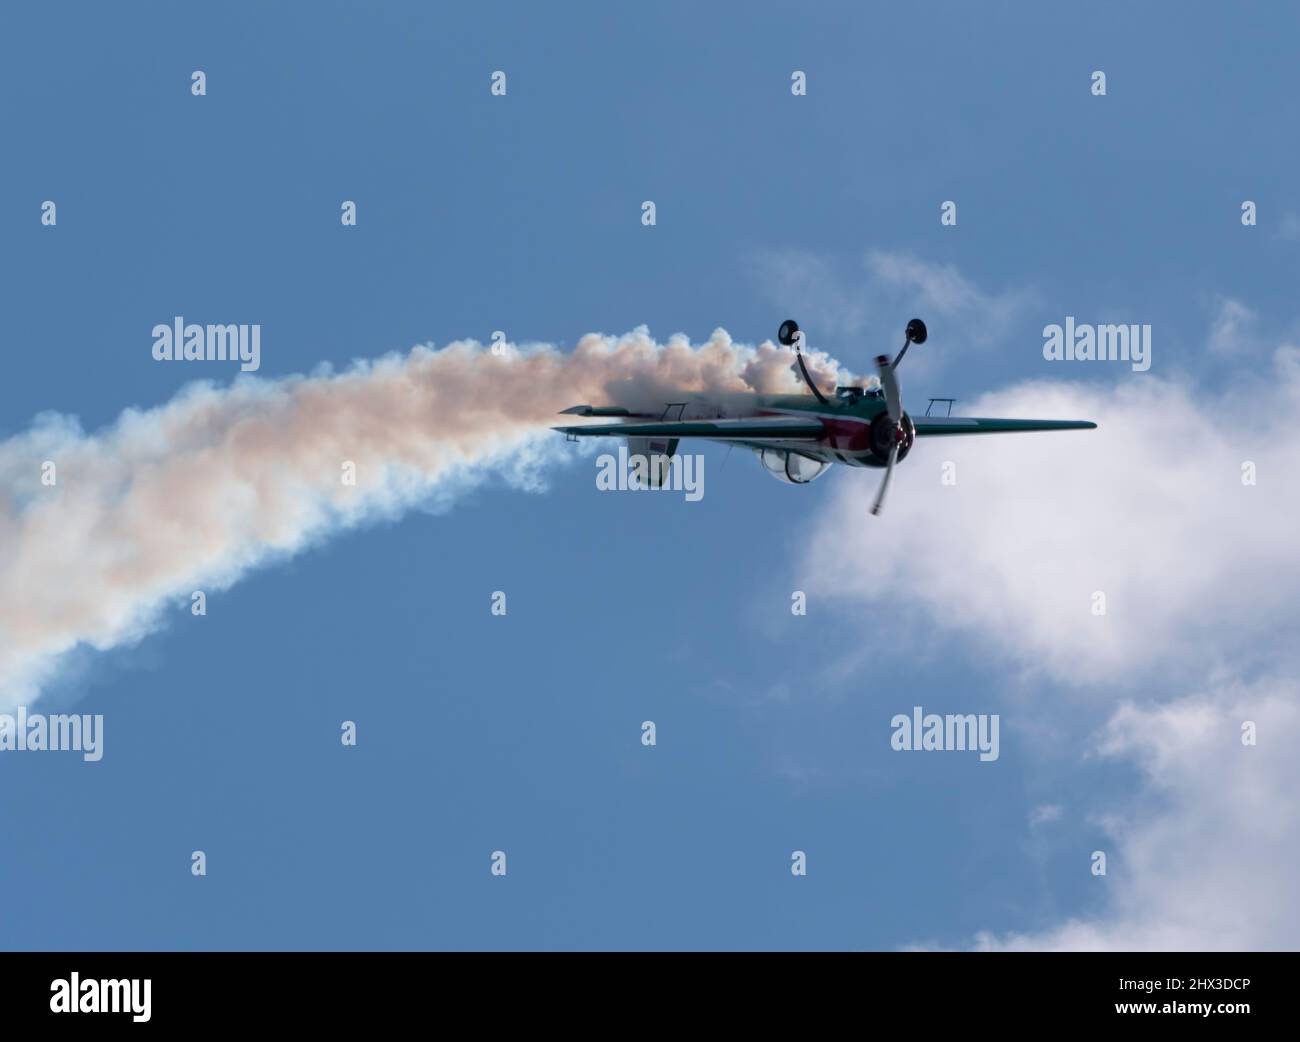 MOSCOW REGION, CHERNOE AIRFIELD 22 May 2021: airplane yak-55 the Sky aviation festival, theory and practice. Stock Photo